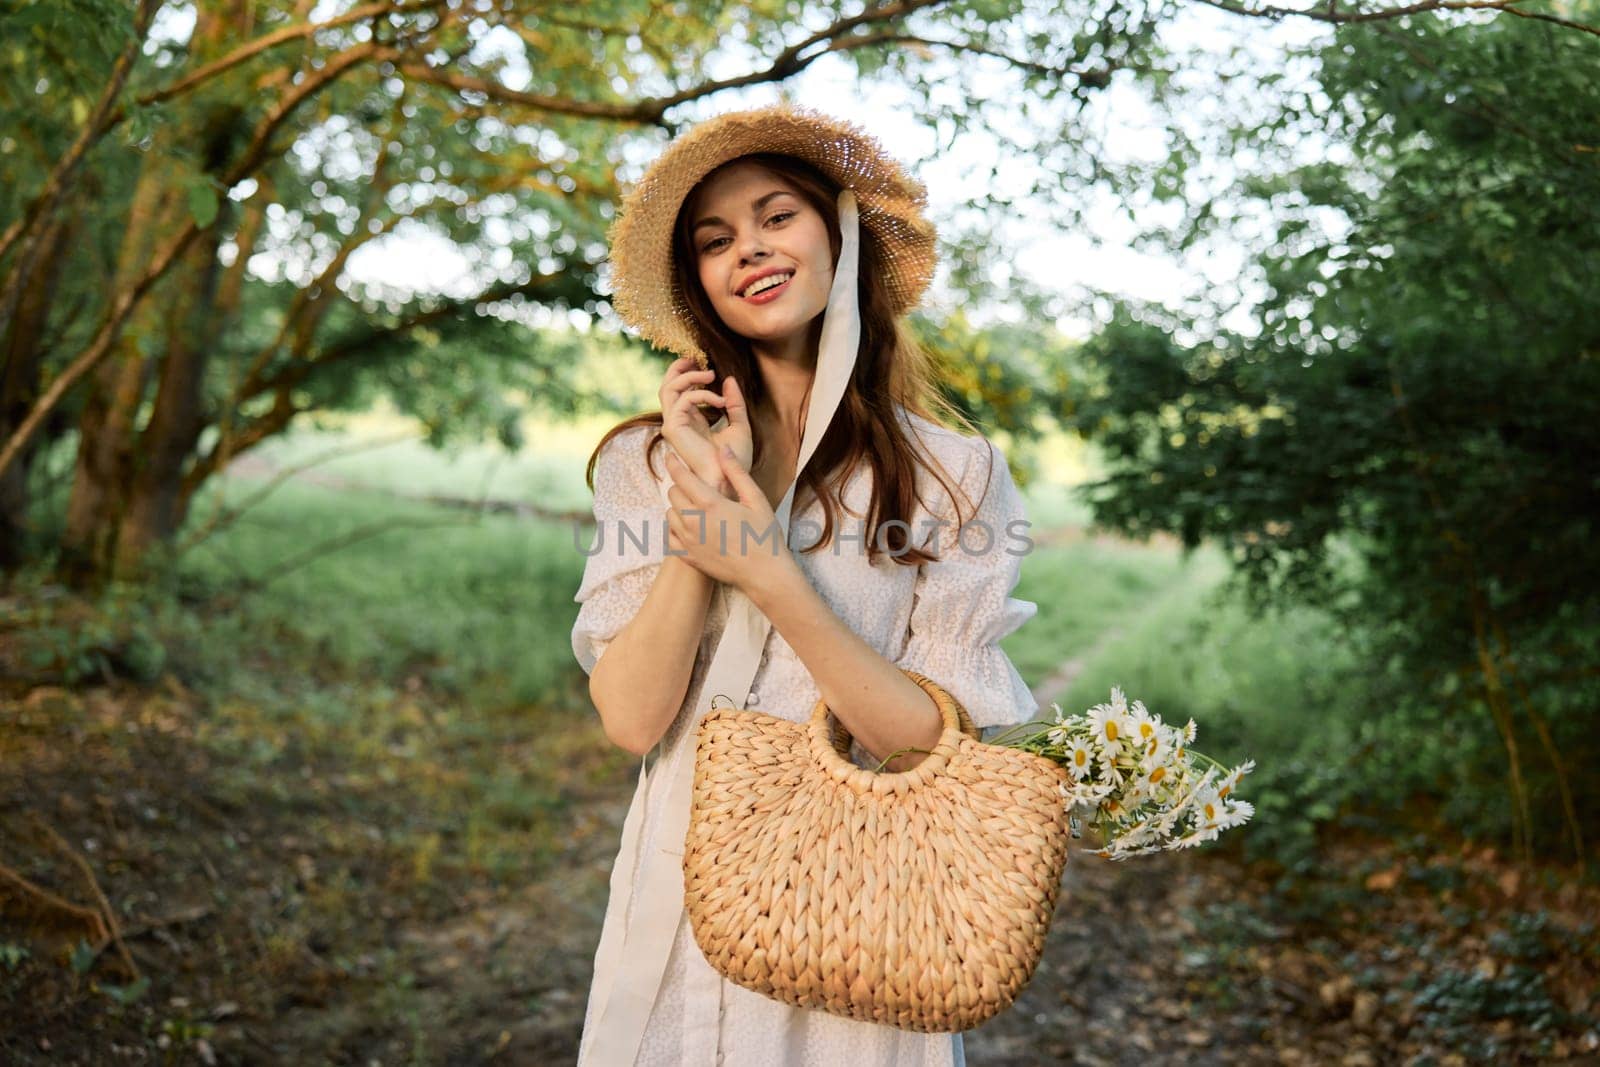 happy, smiling woman in a wicker hat with a basket of daisies in her hands walks through the forest. High quality photo